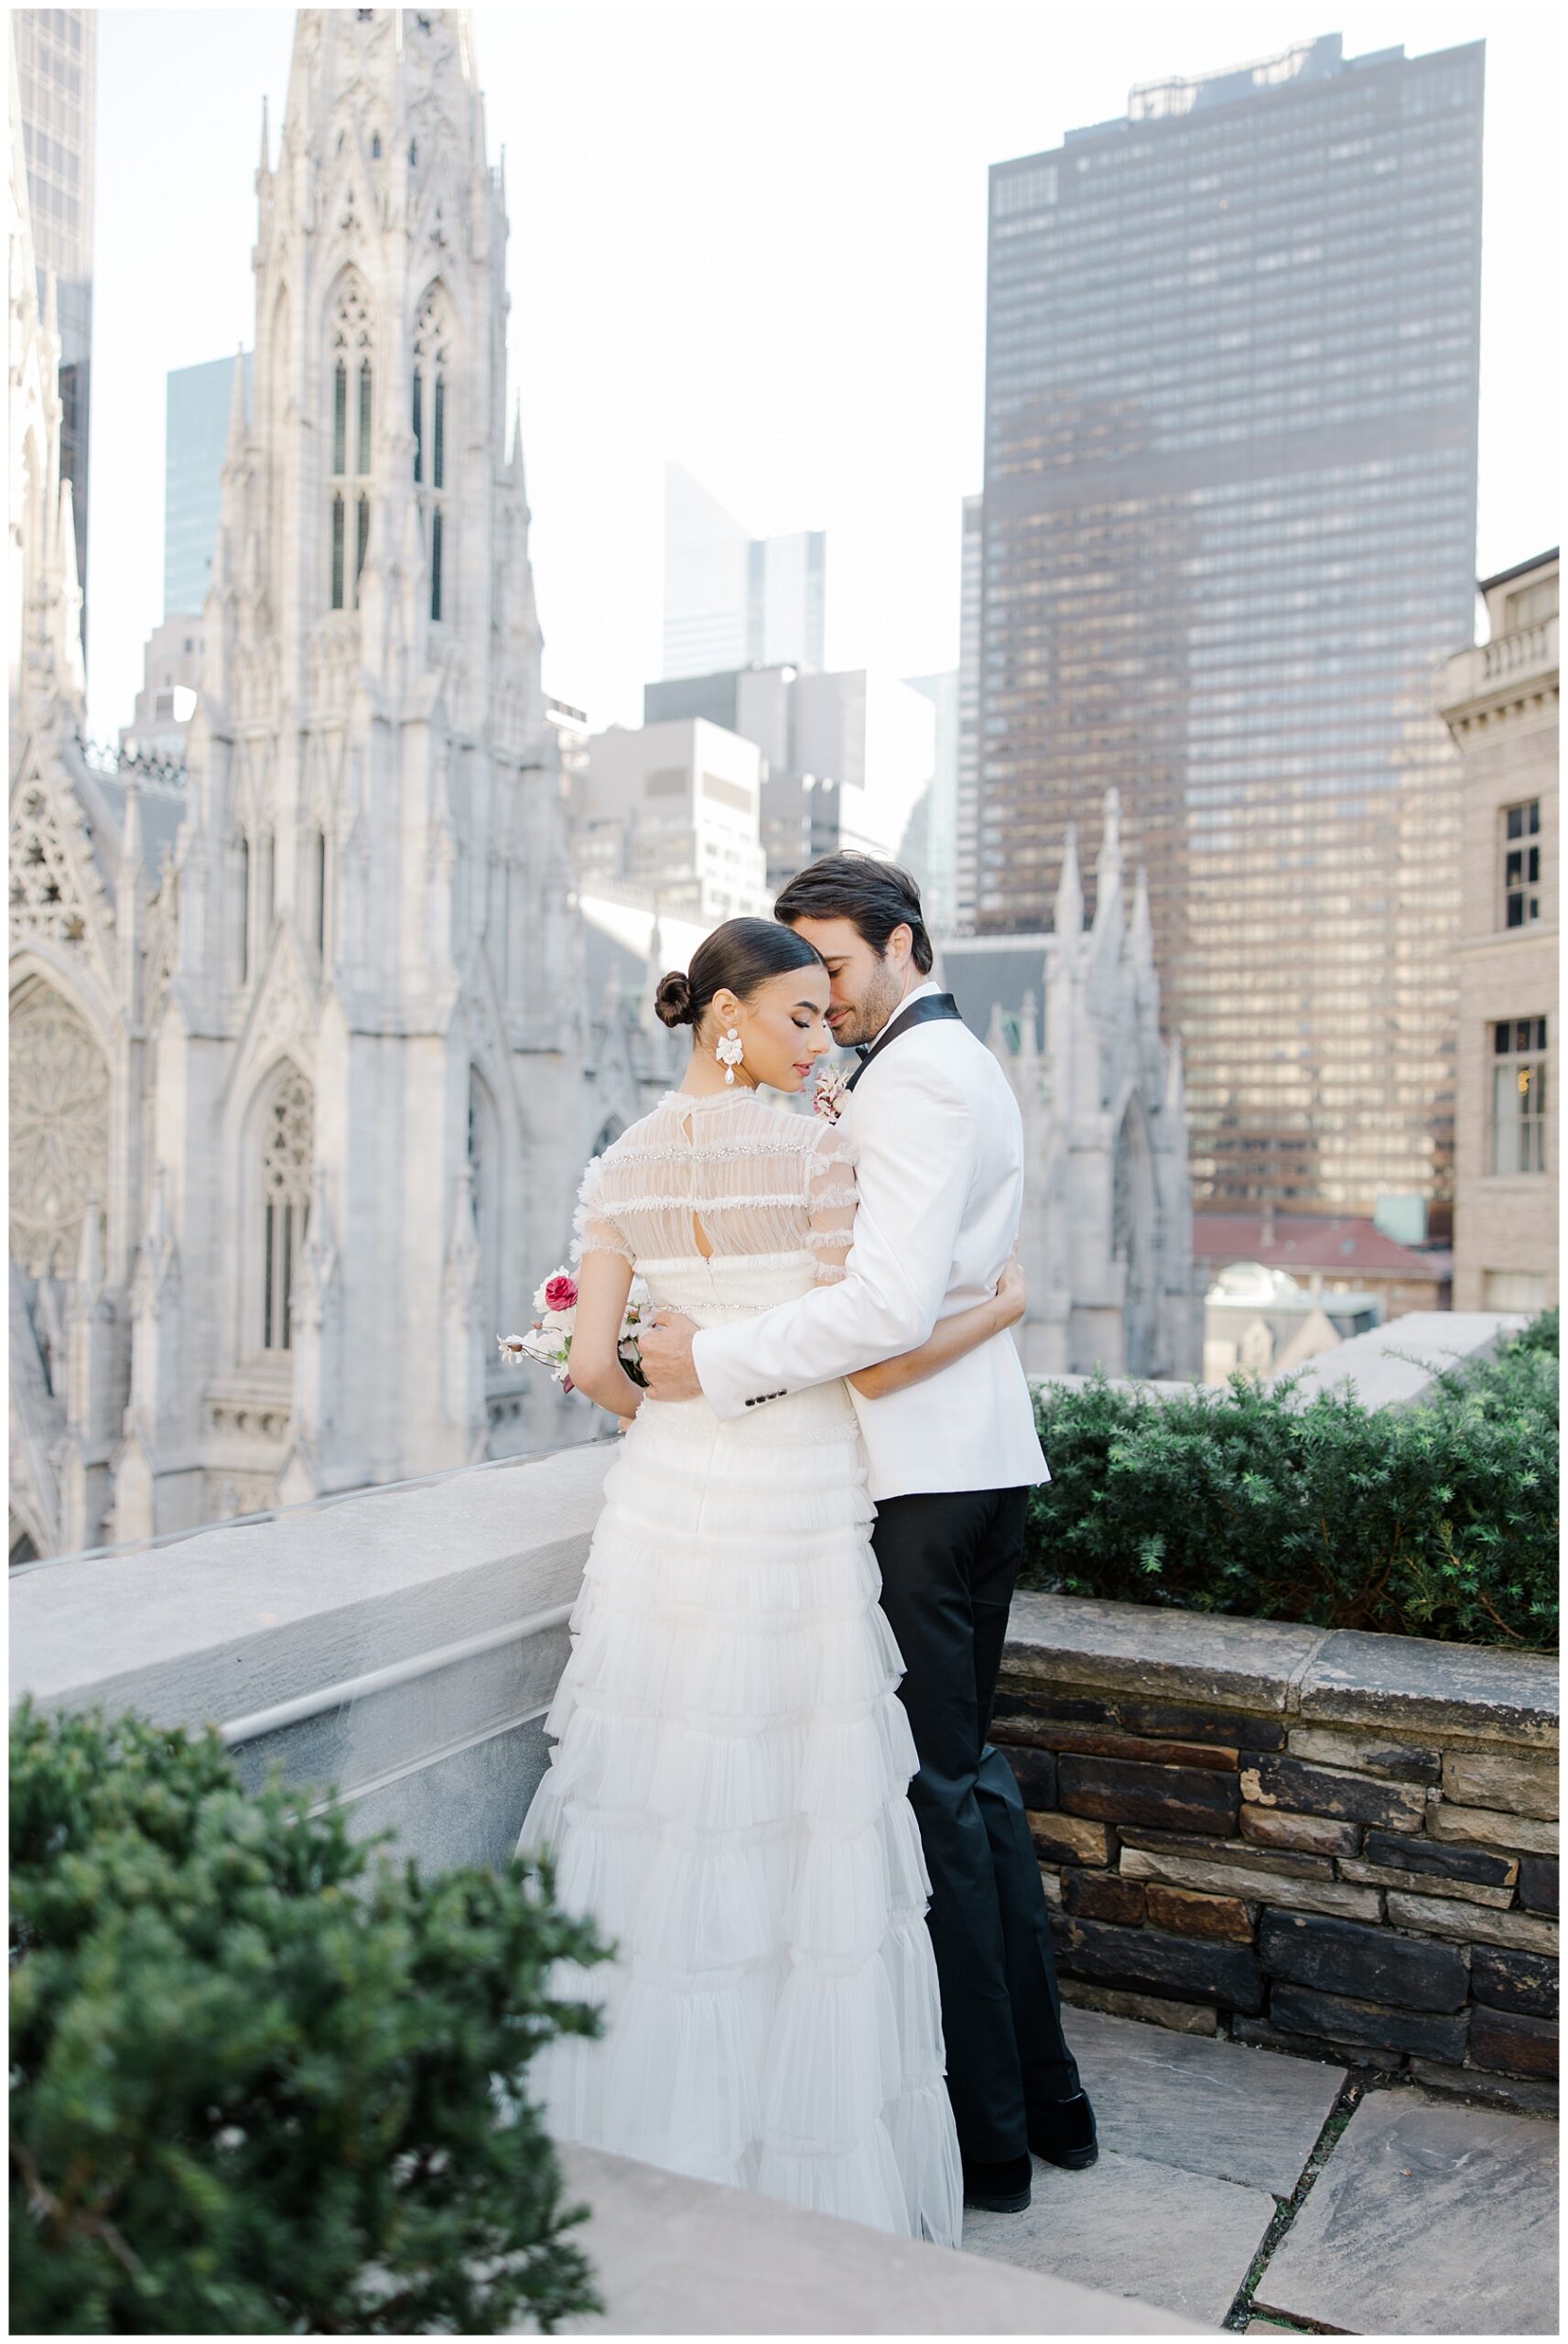 Newlywed portraits on rooftop in NYC